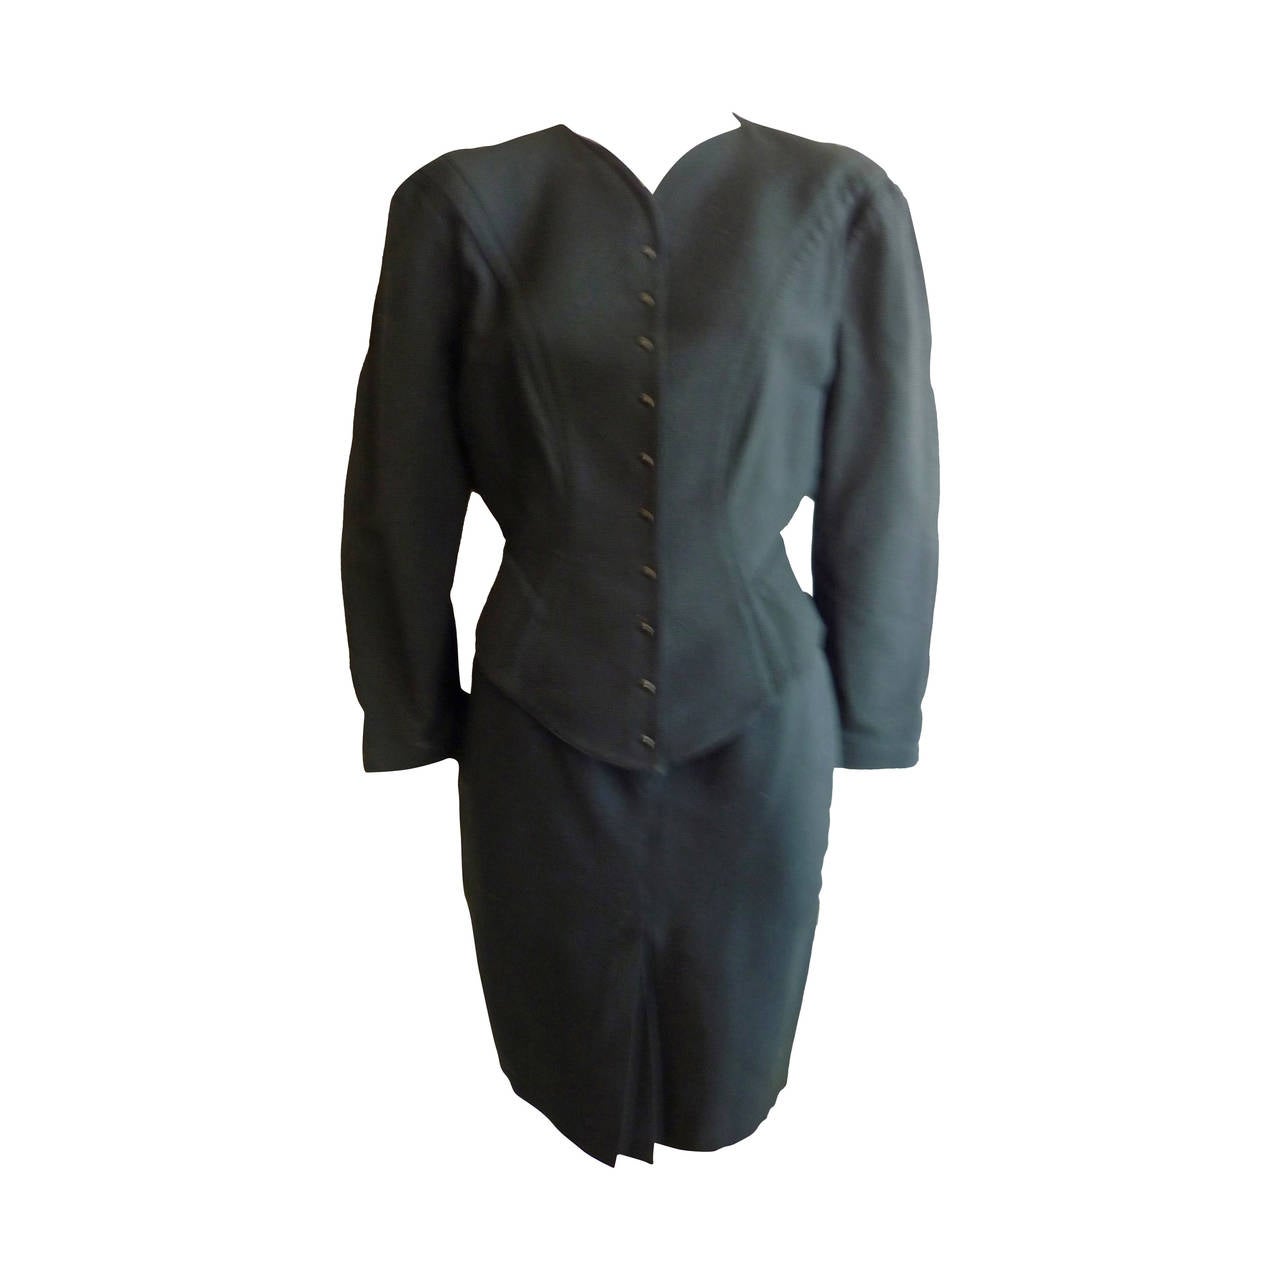 Thierry Mugler 1990s Black Ribbed Cotton Suit (42 Fr)